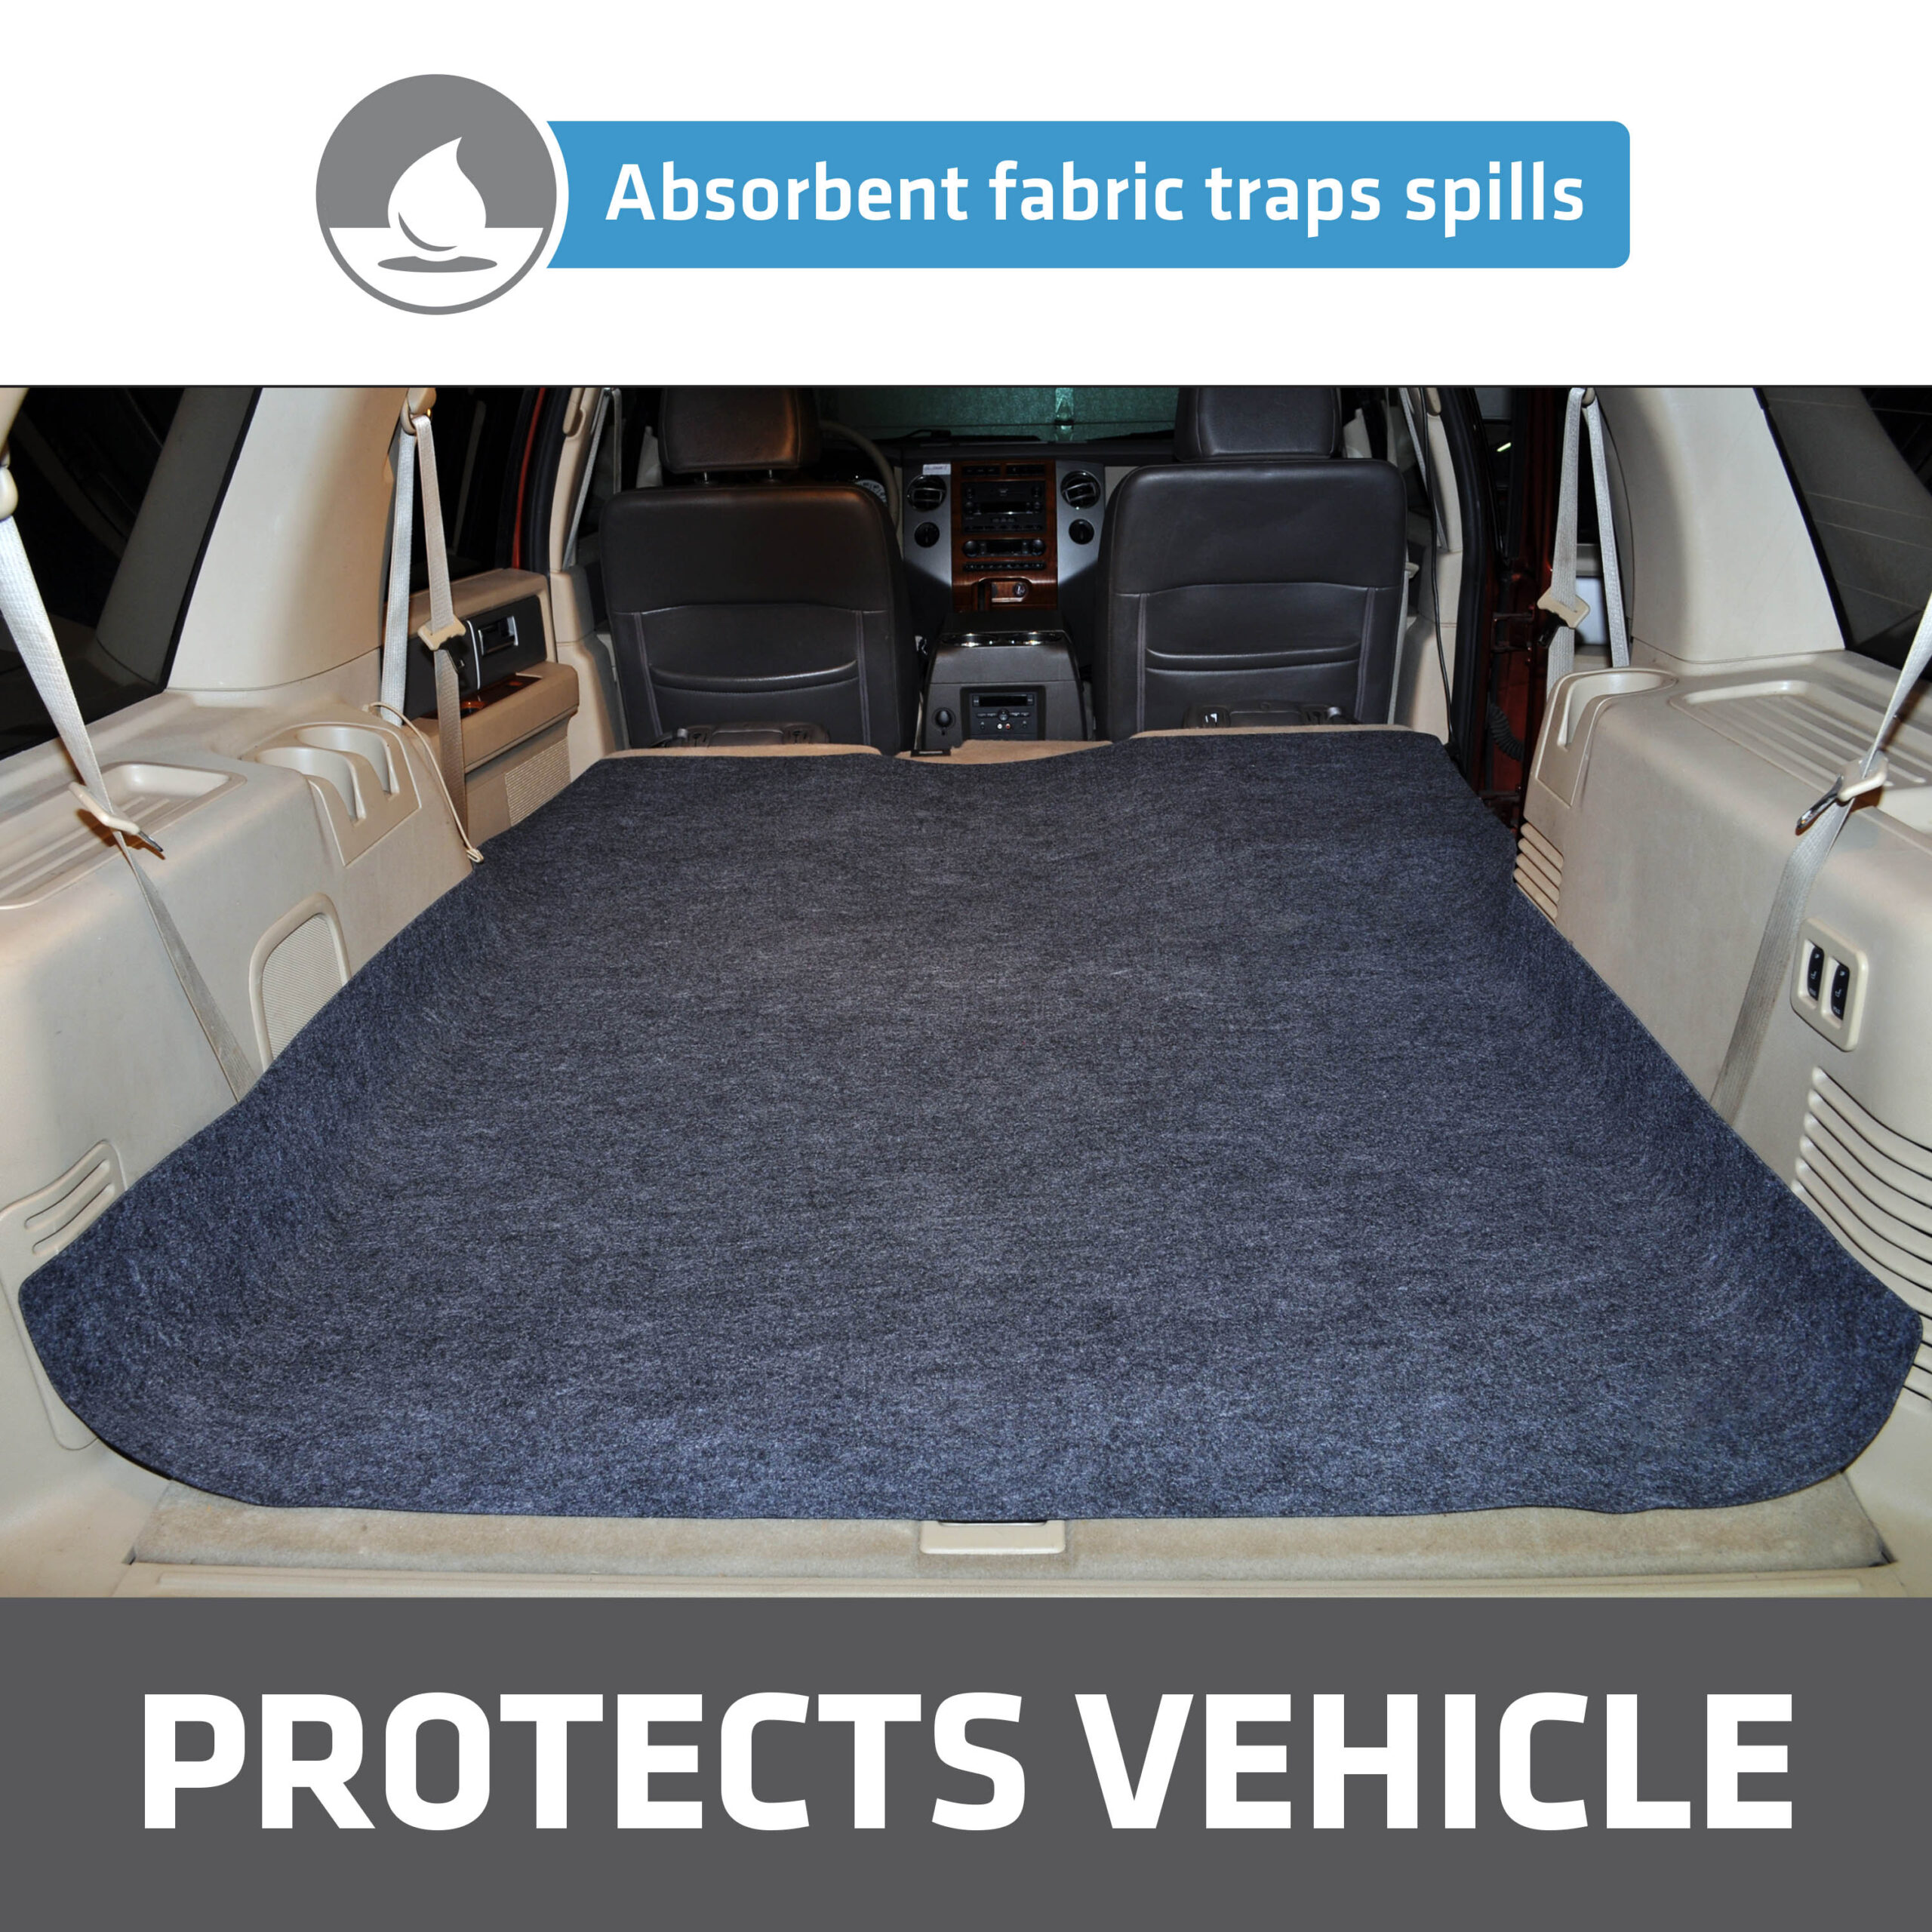 https://drymate.com/wp-content/uploads/2021/07/2-Cargo-liner-mat-trunk-protects-vehicle-easy-install-1-scaled.jpg